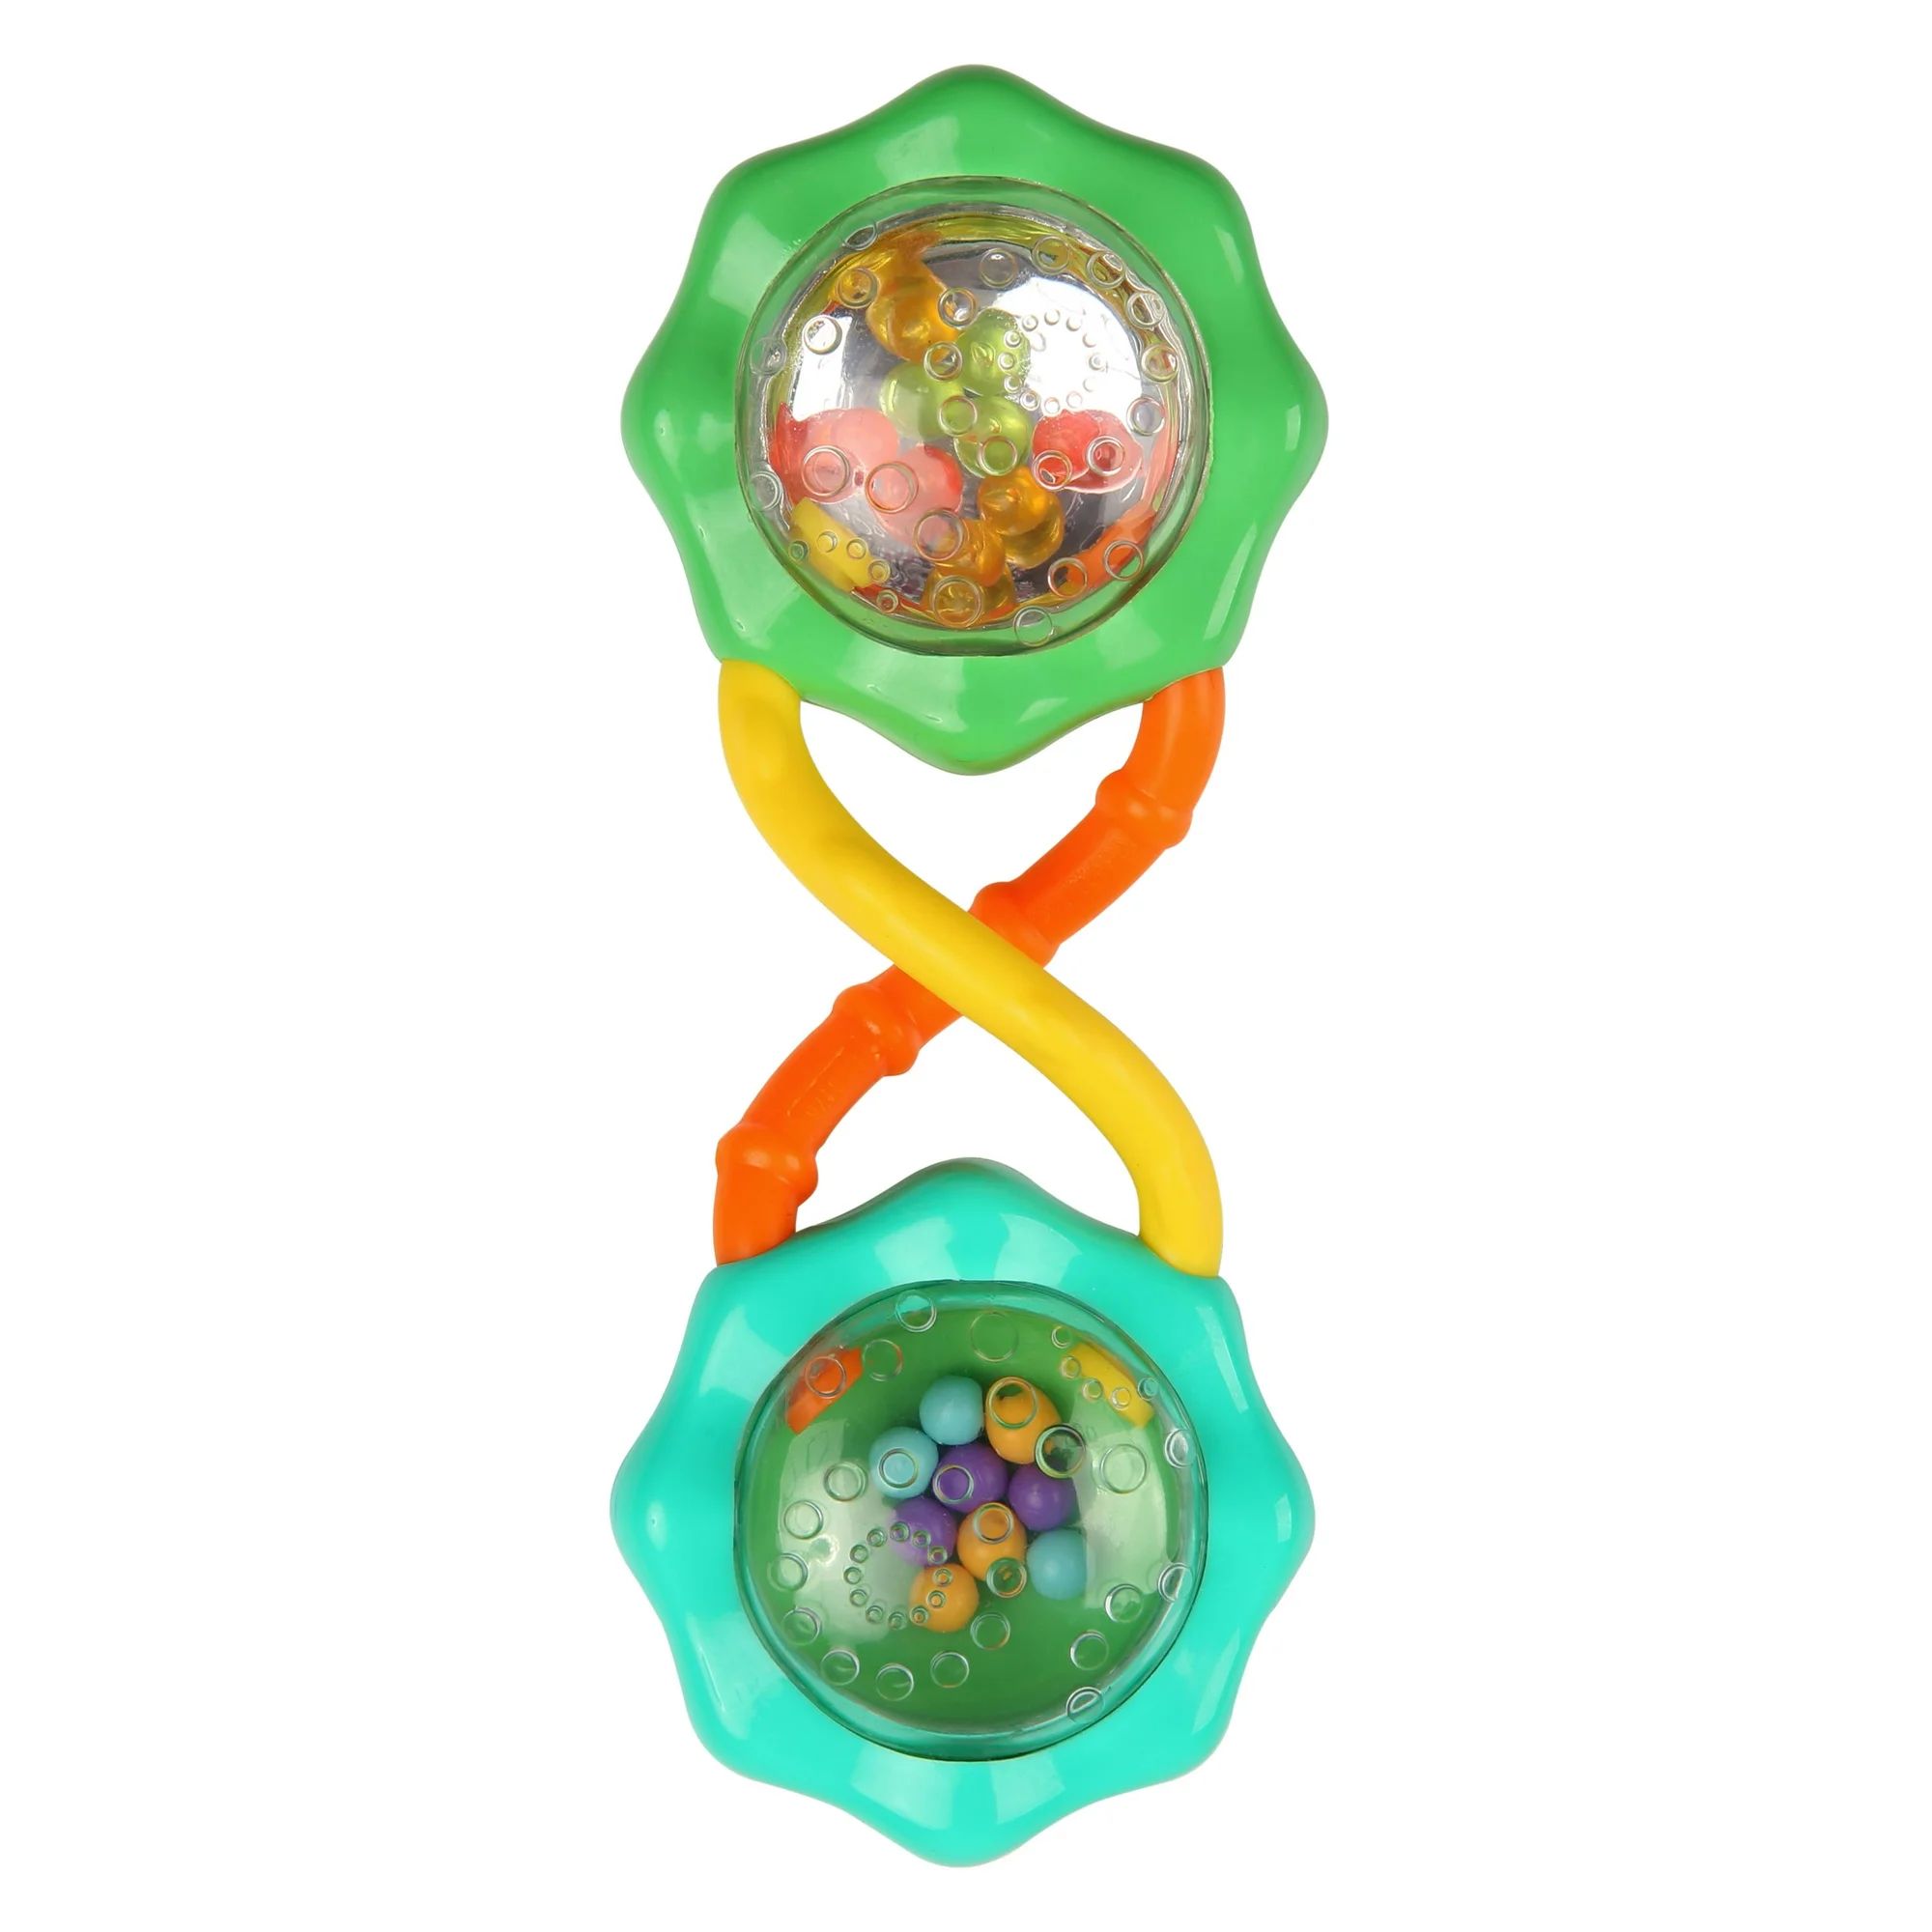 Bright Starts Rattle & Shake BPA-free Baby Barbell Toy, Green, Ages 3 Months+ | Walmart (US)